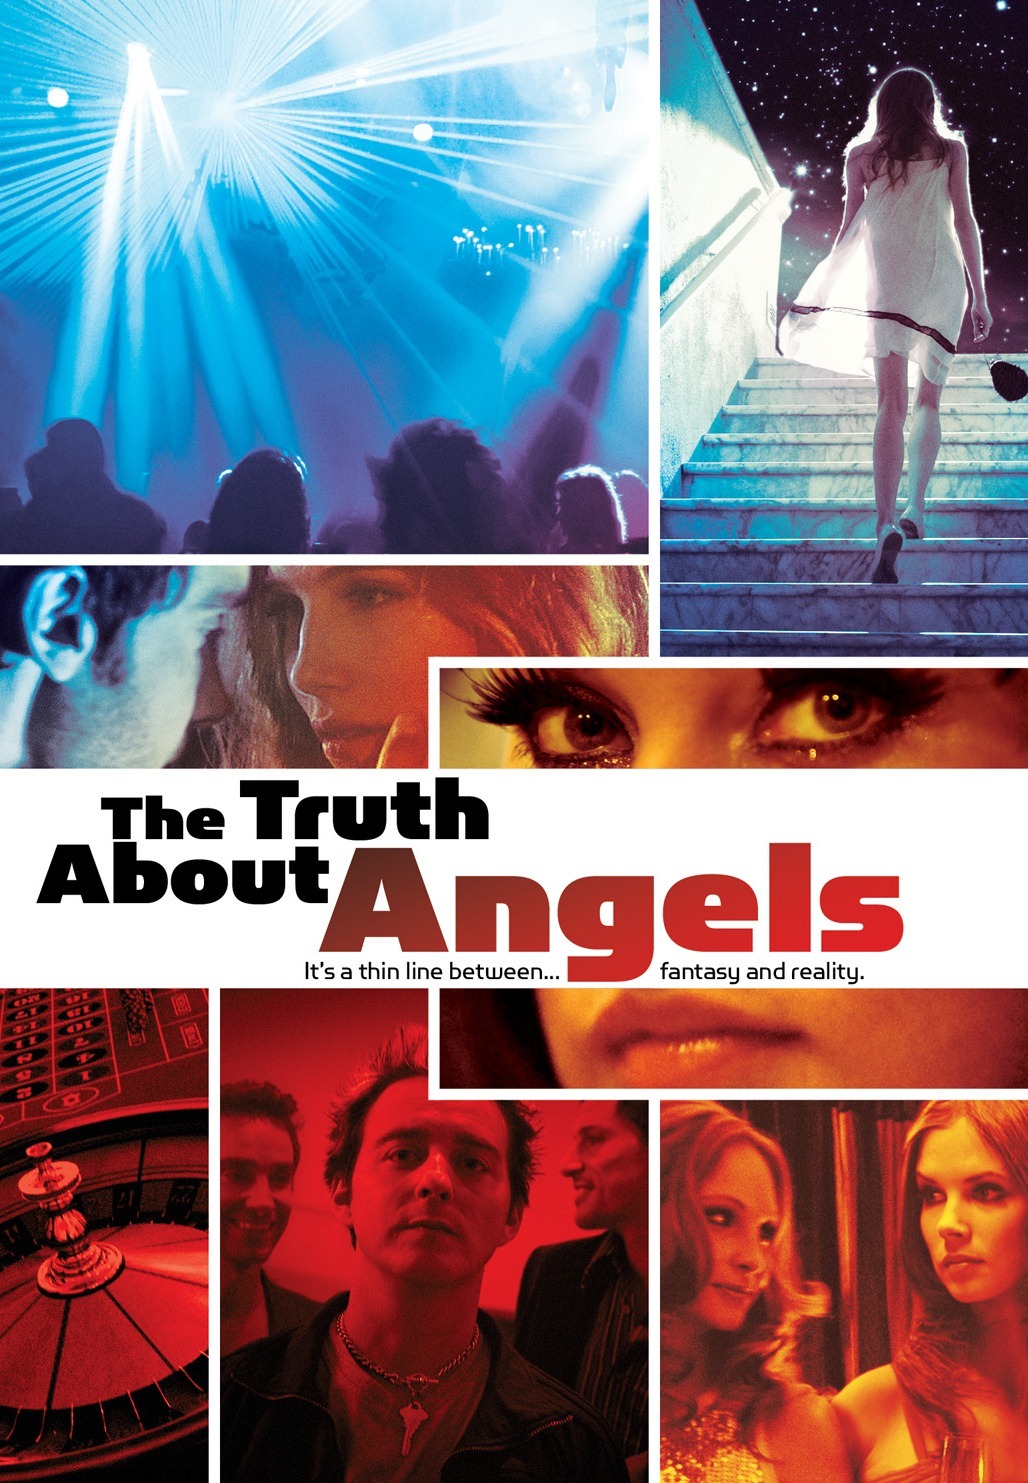 The Truth About Angels 2011 movie nude scenes